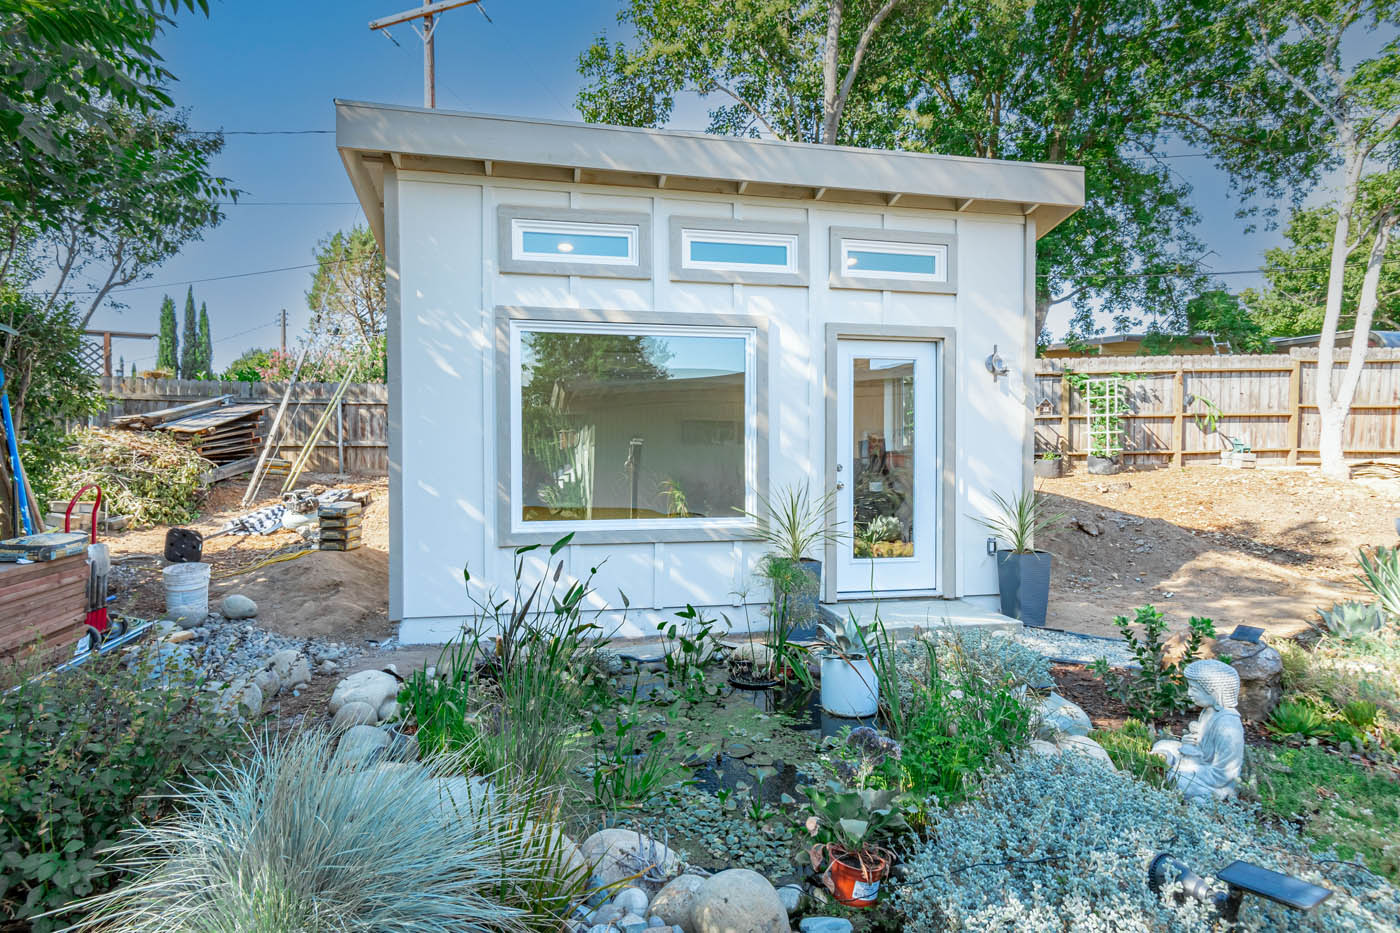 A Portland detached ADU in a California backyard by a pool, learn more about our best tiny home builder in Portland.